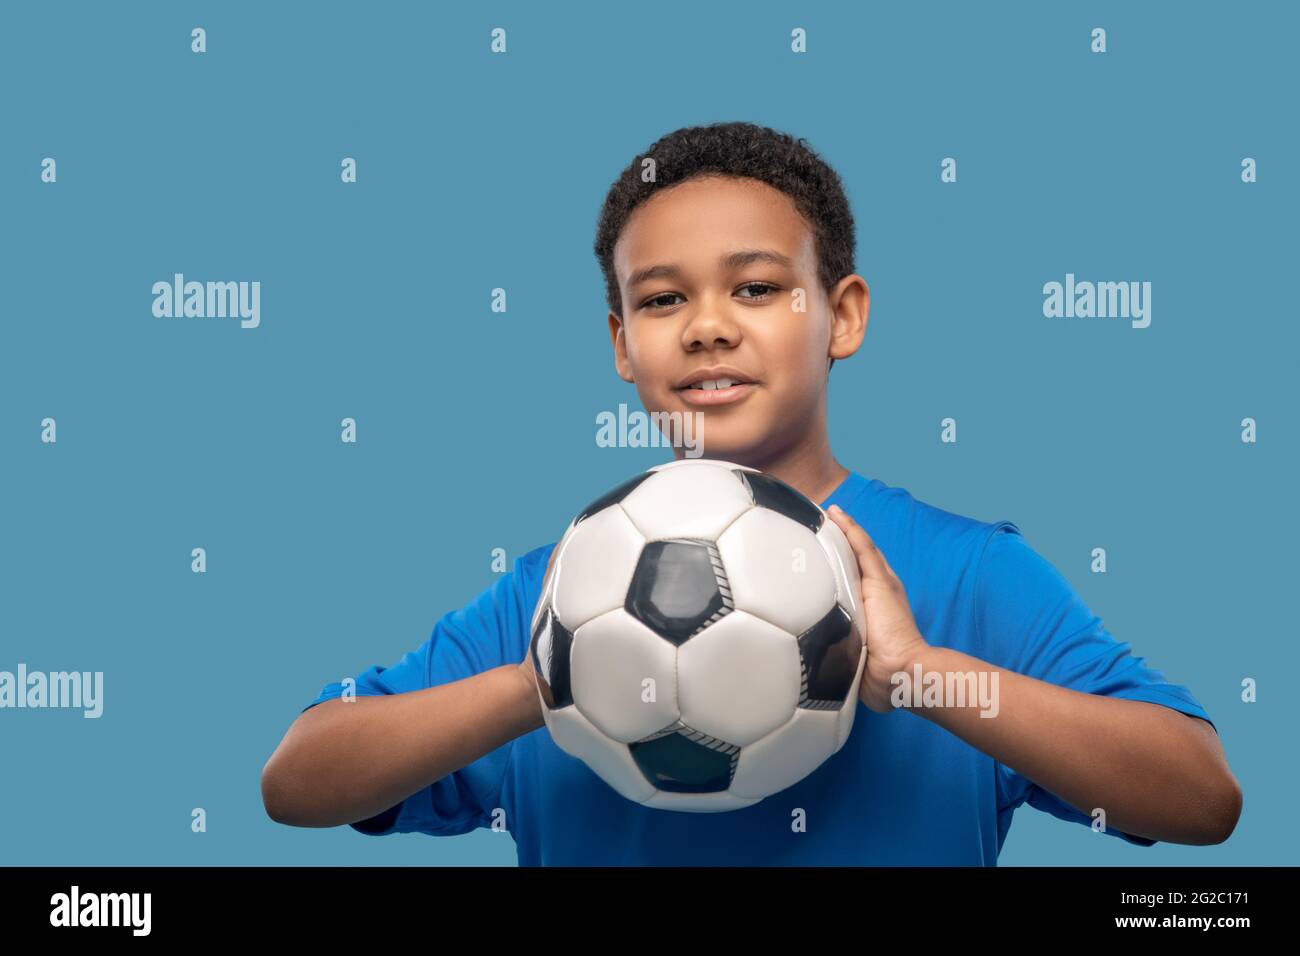 Attentive boy taking aim with ball in hands Stock Photo